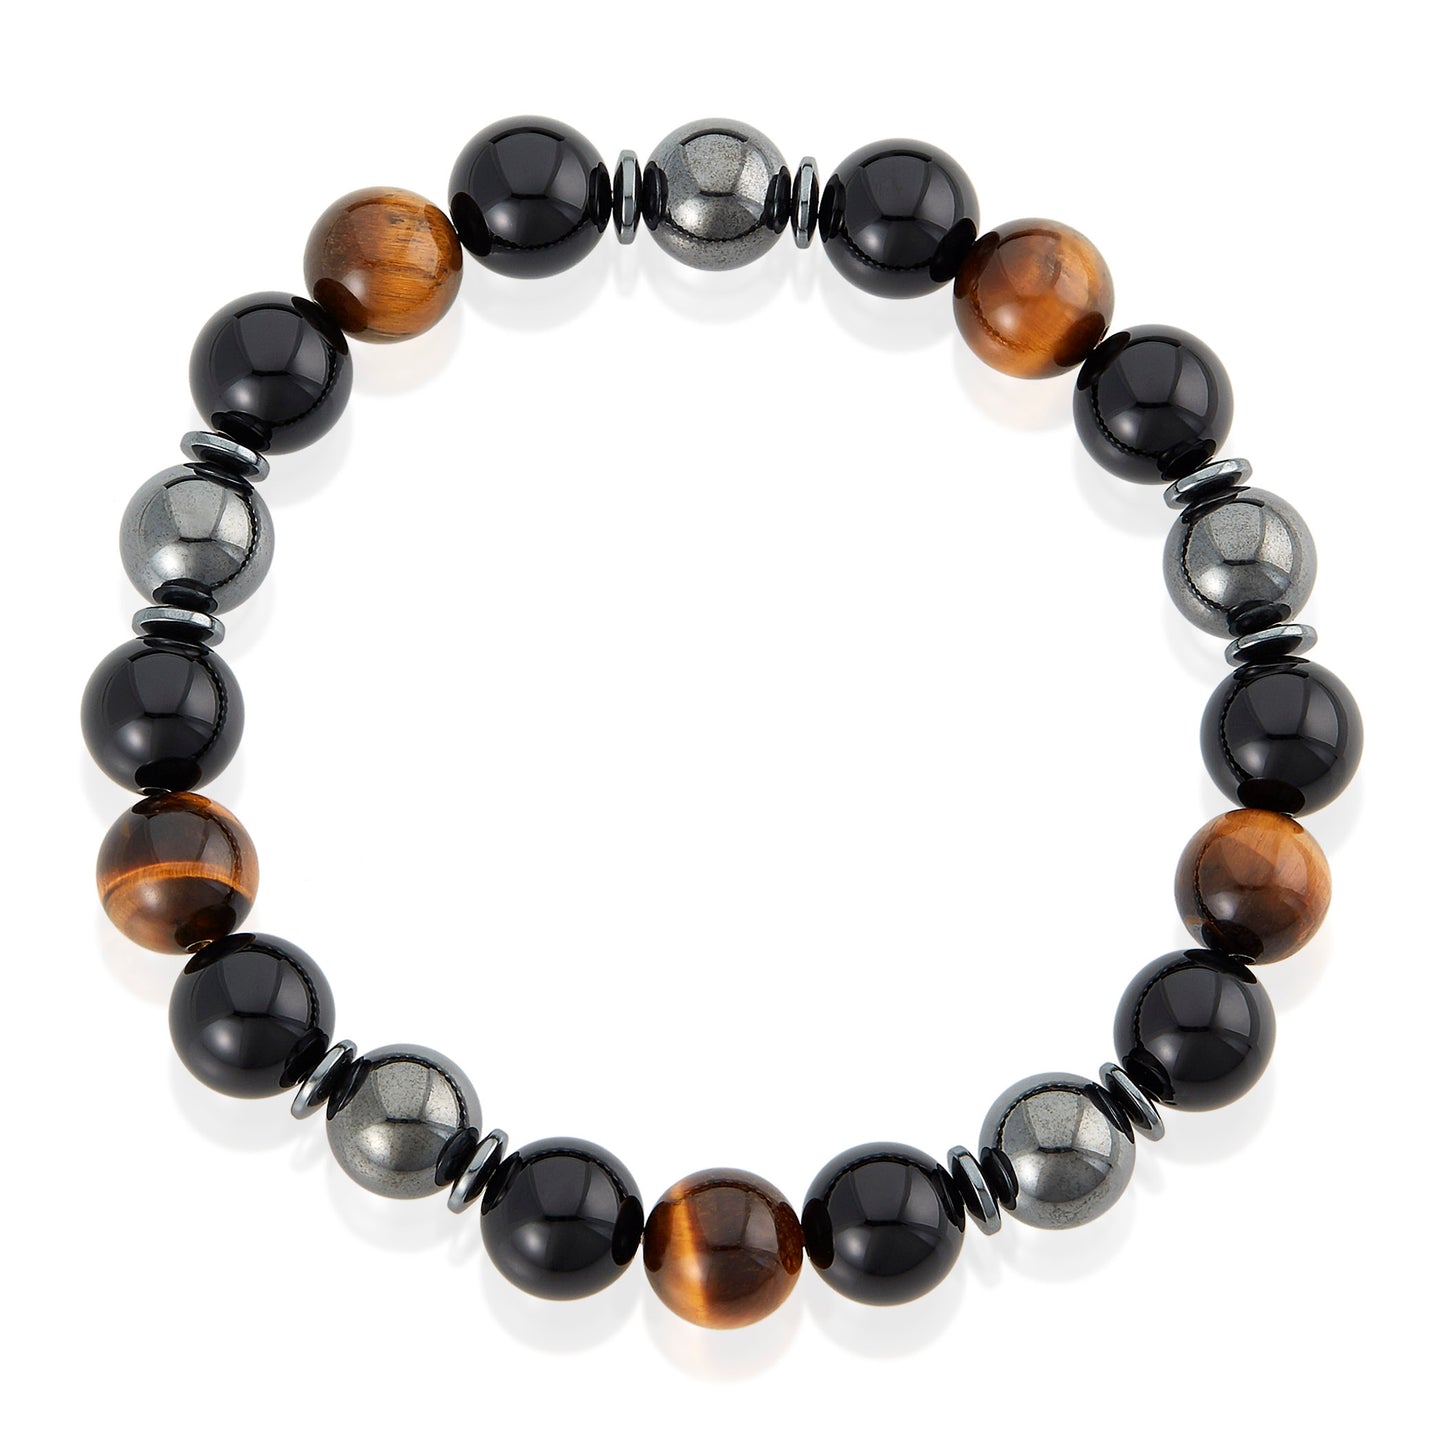 Men's 20 Piece 10mm Natural Stones with Magnetic Hematite and Onyx Stretch Bracelet Pack